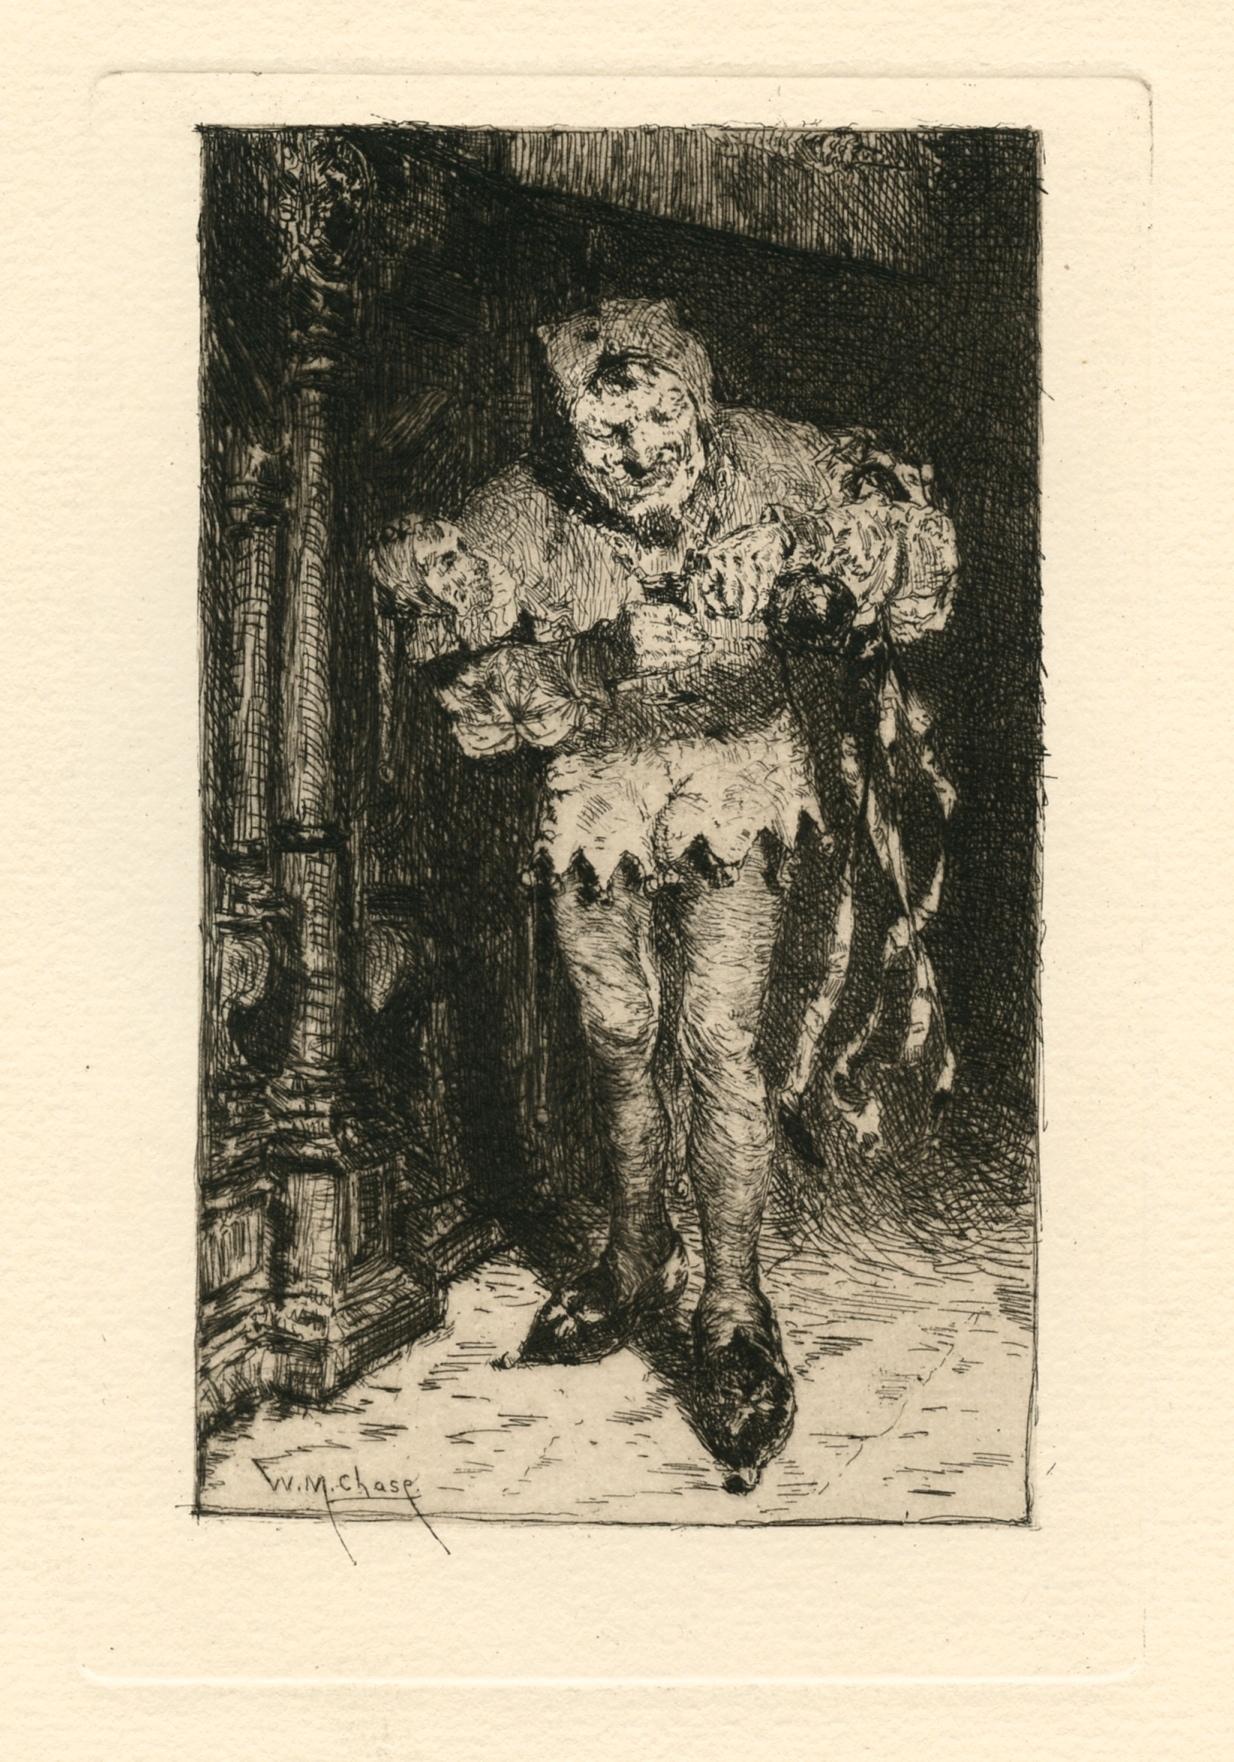 William Merritt Chase Portrait Print - "Keying Up - The Court Jester" original etching